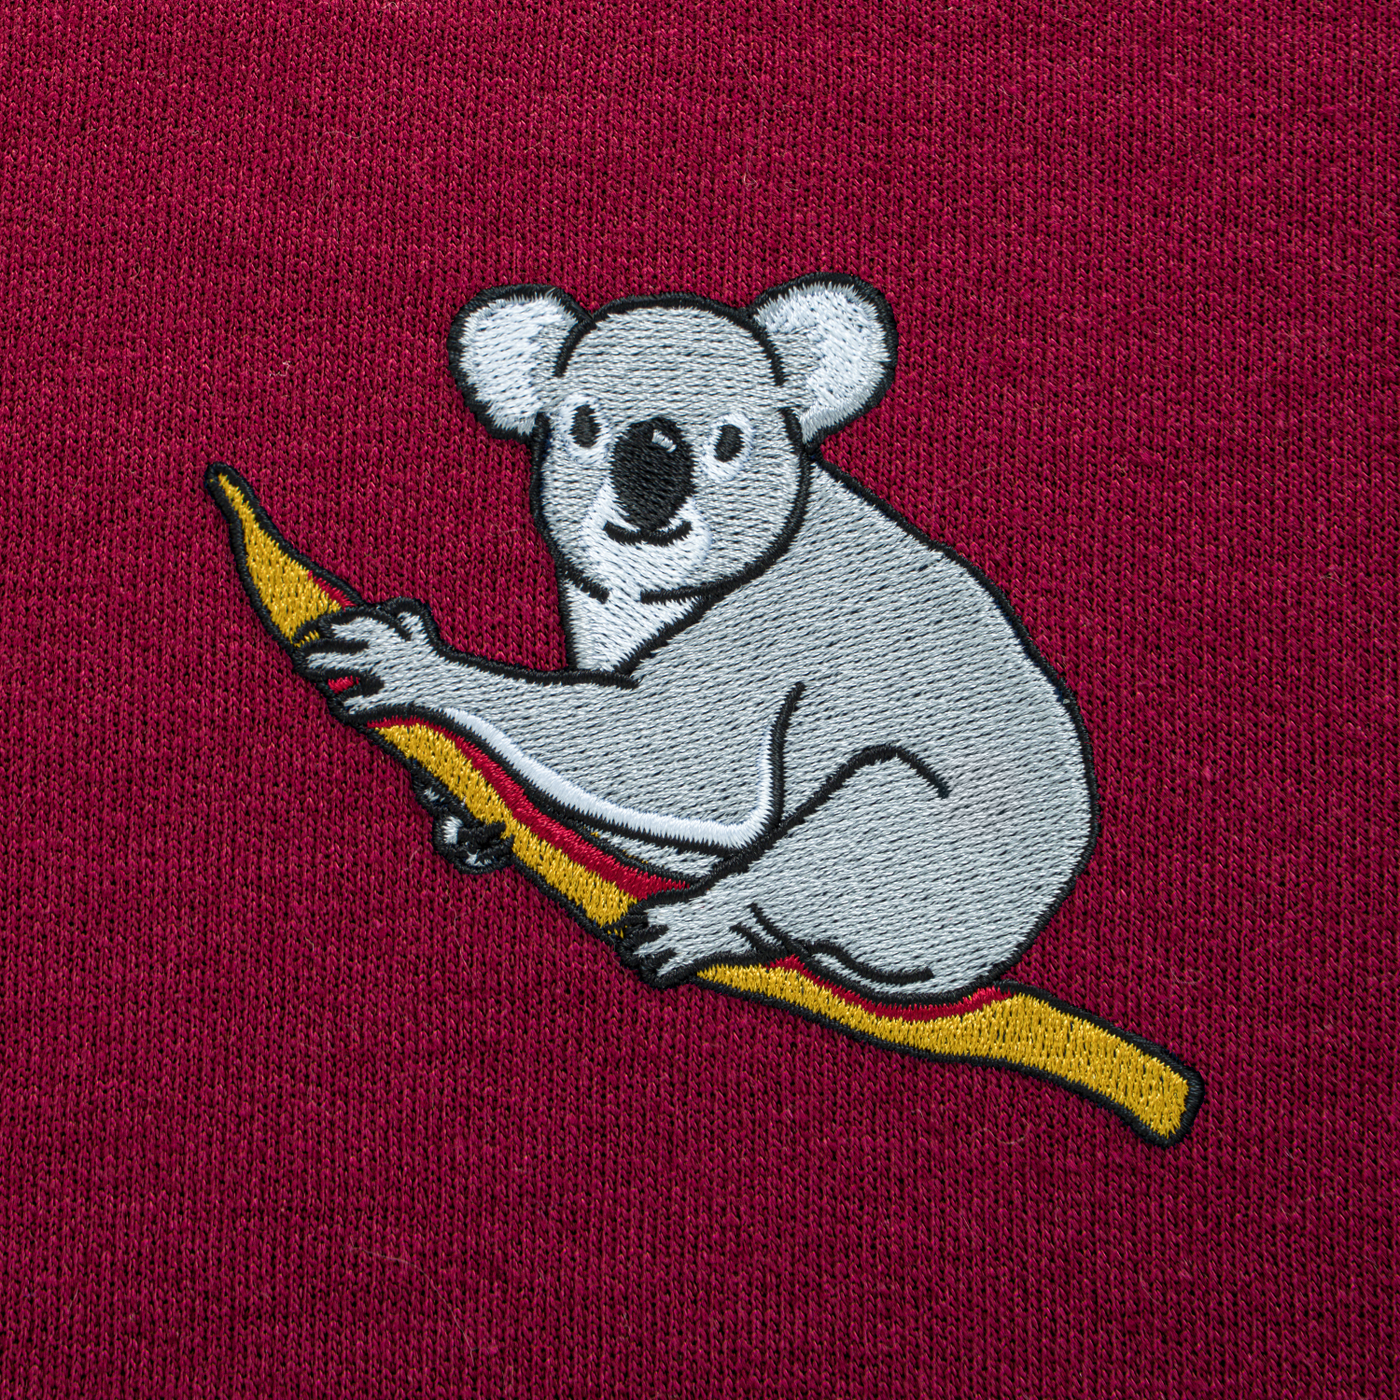 Bobby's Planet Women's Embroidered Koala Sweatshirt from Australia Down Under Animals Collection in Maroon Color#color_maroon